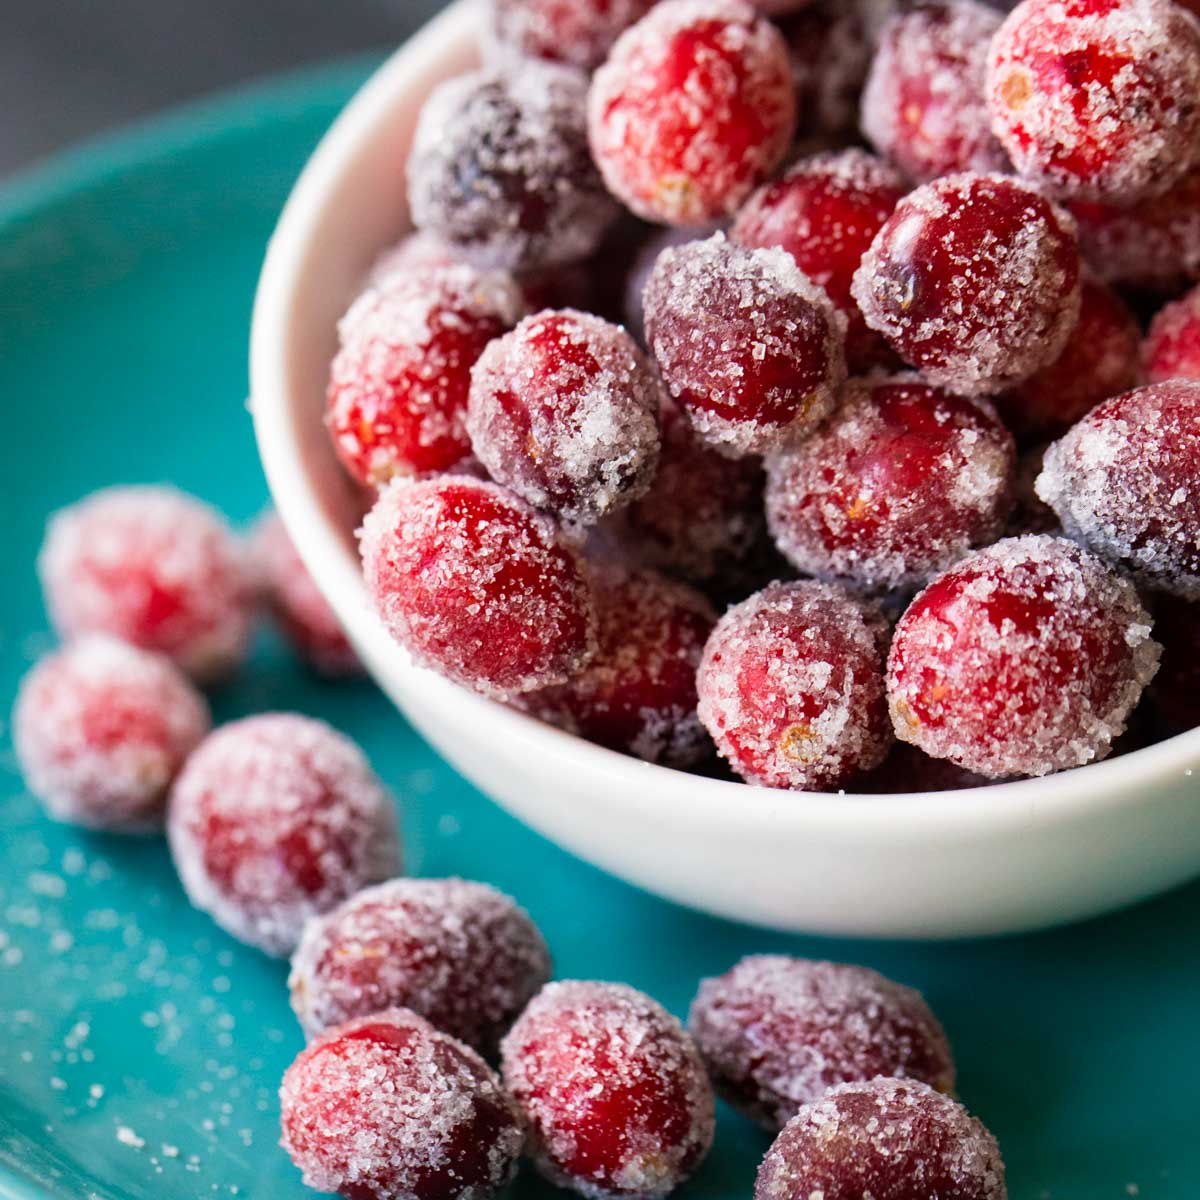 A close-up photo of sugared cranberries show the red fruits and sparkling sugar coating.